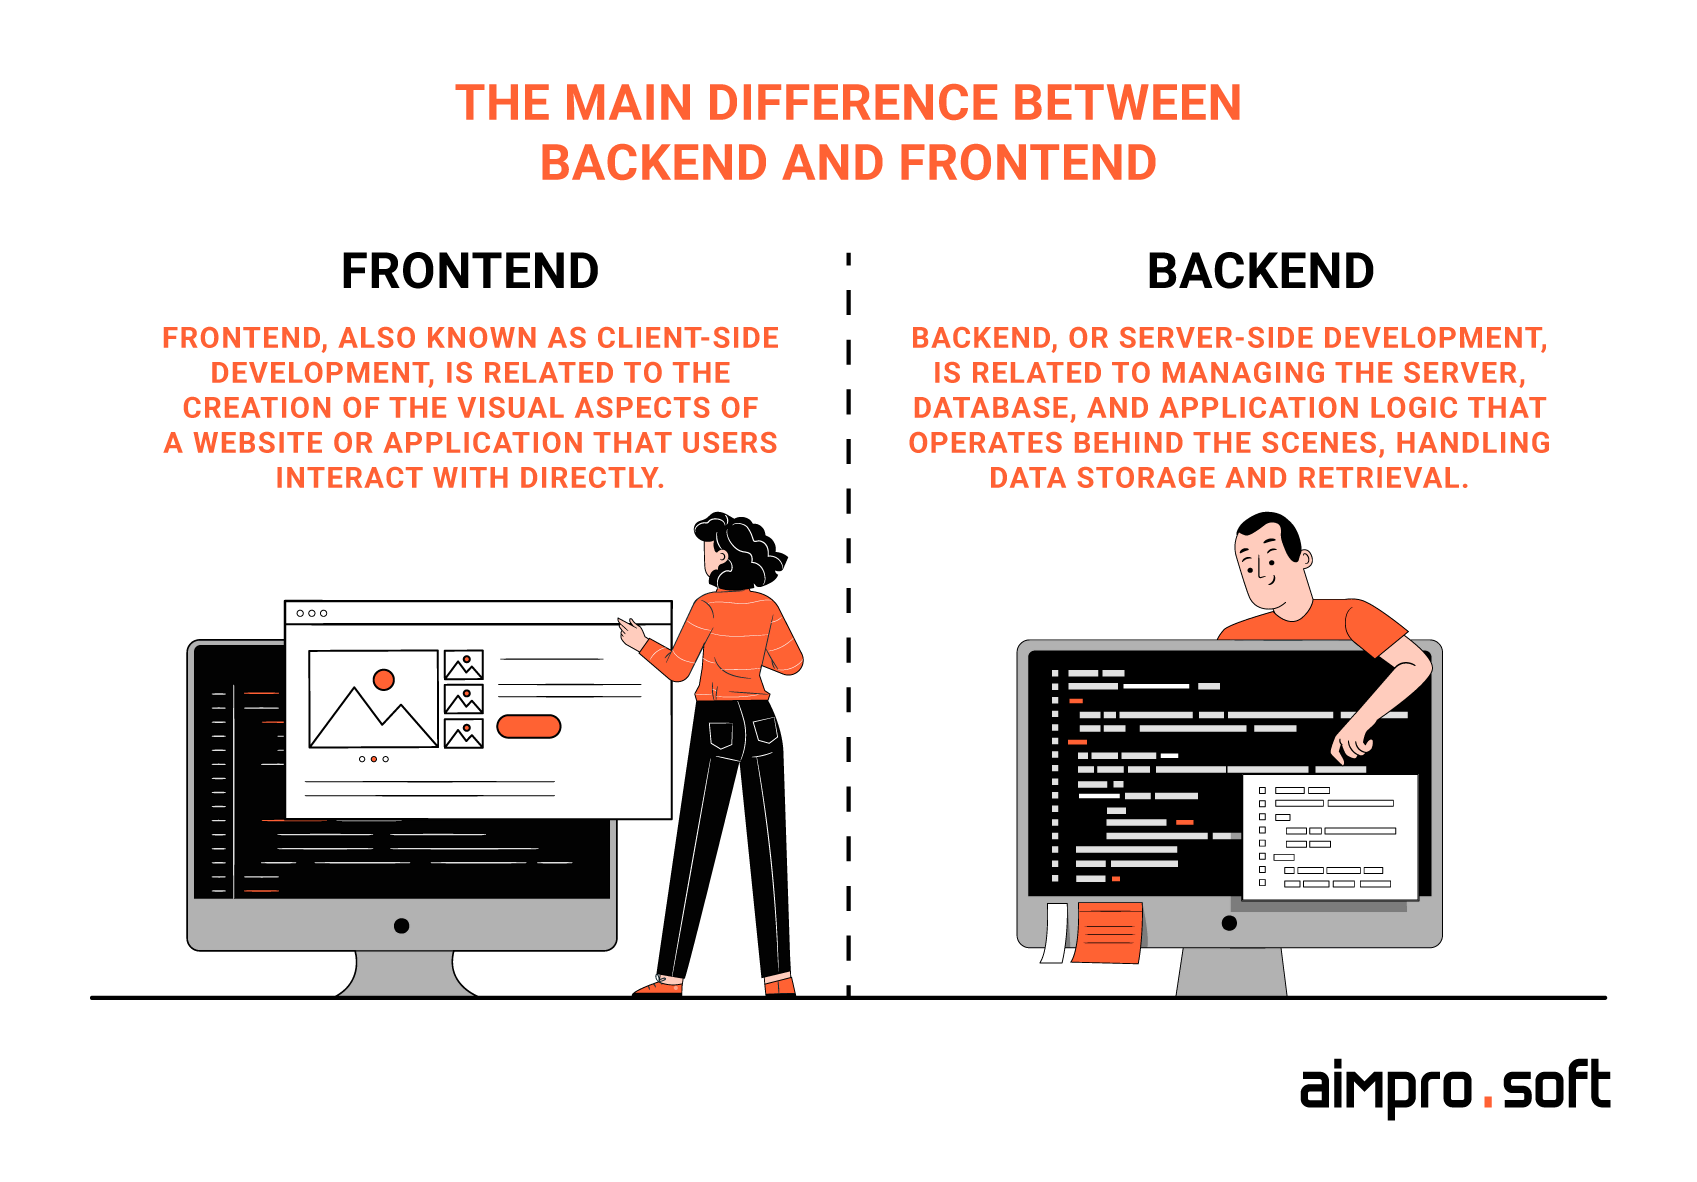 The main difference between backend and frontend